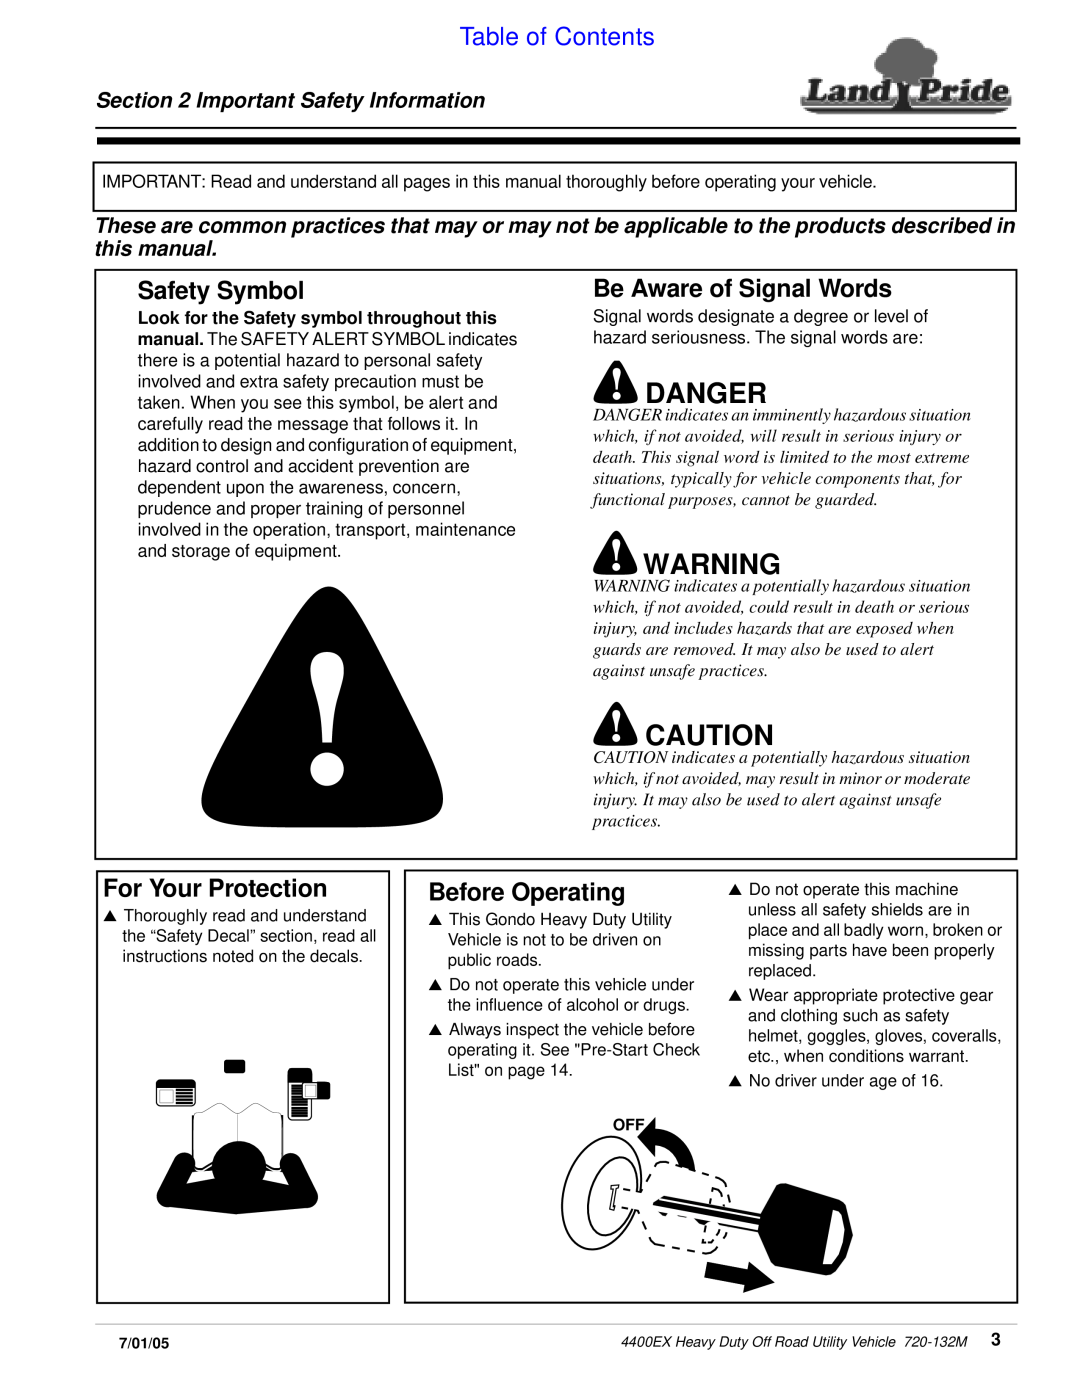 Land Pride 22081 Danger, Safety Symbol, Be Aware of Signal Words, For Your Protection, Before Operating, Table of Contents 